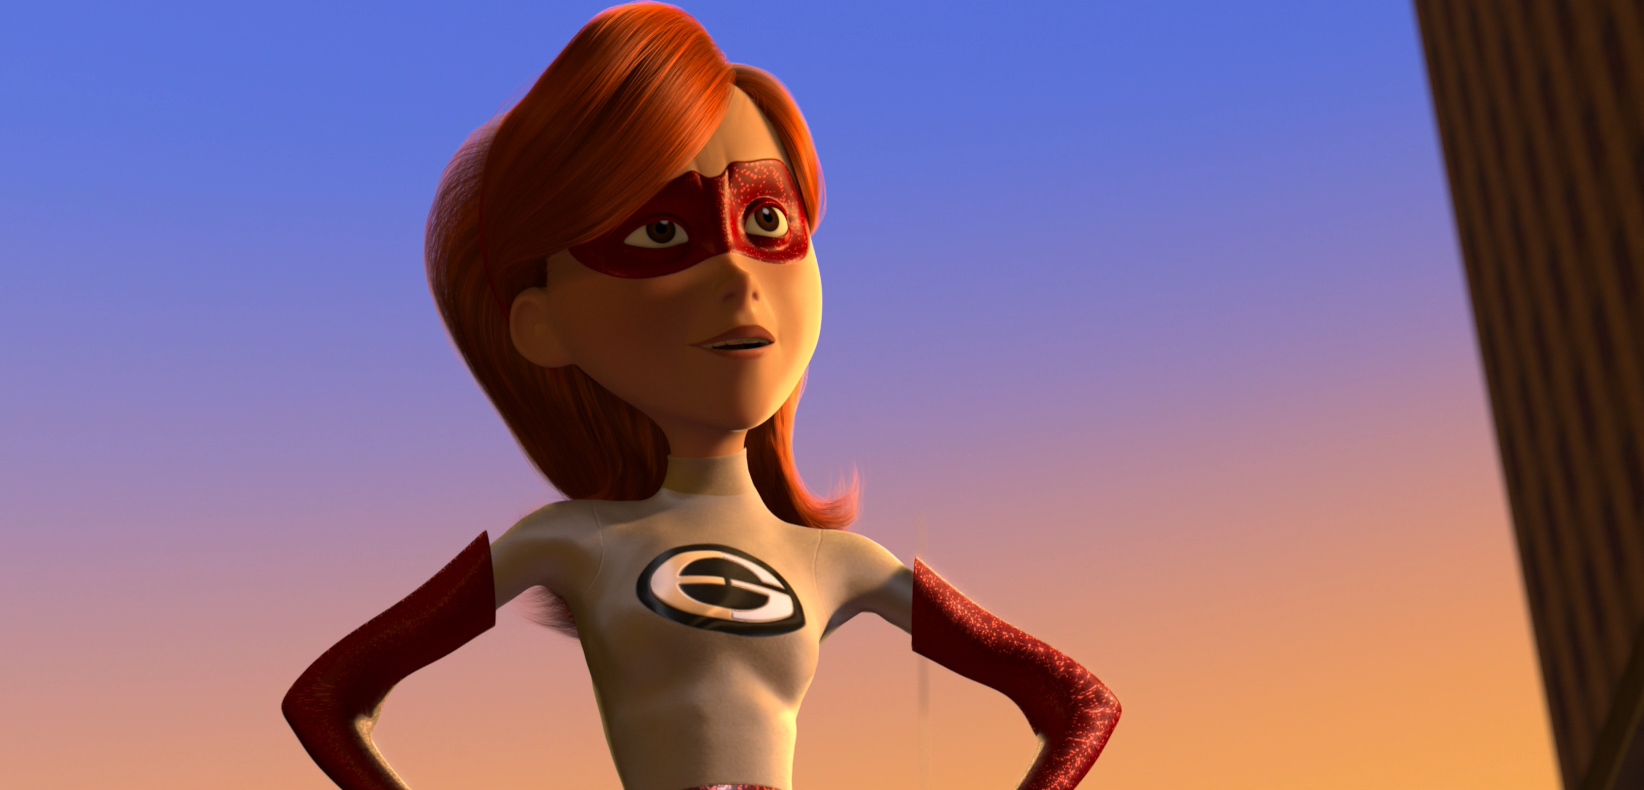 Watch: 'The Incredibles' Director Brad Bird Shows Why Animation is So Much  More Than Just a Genre